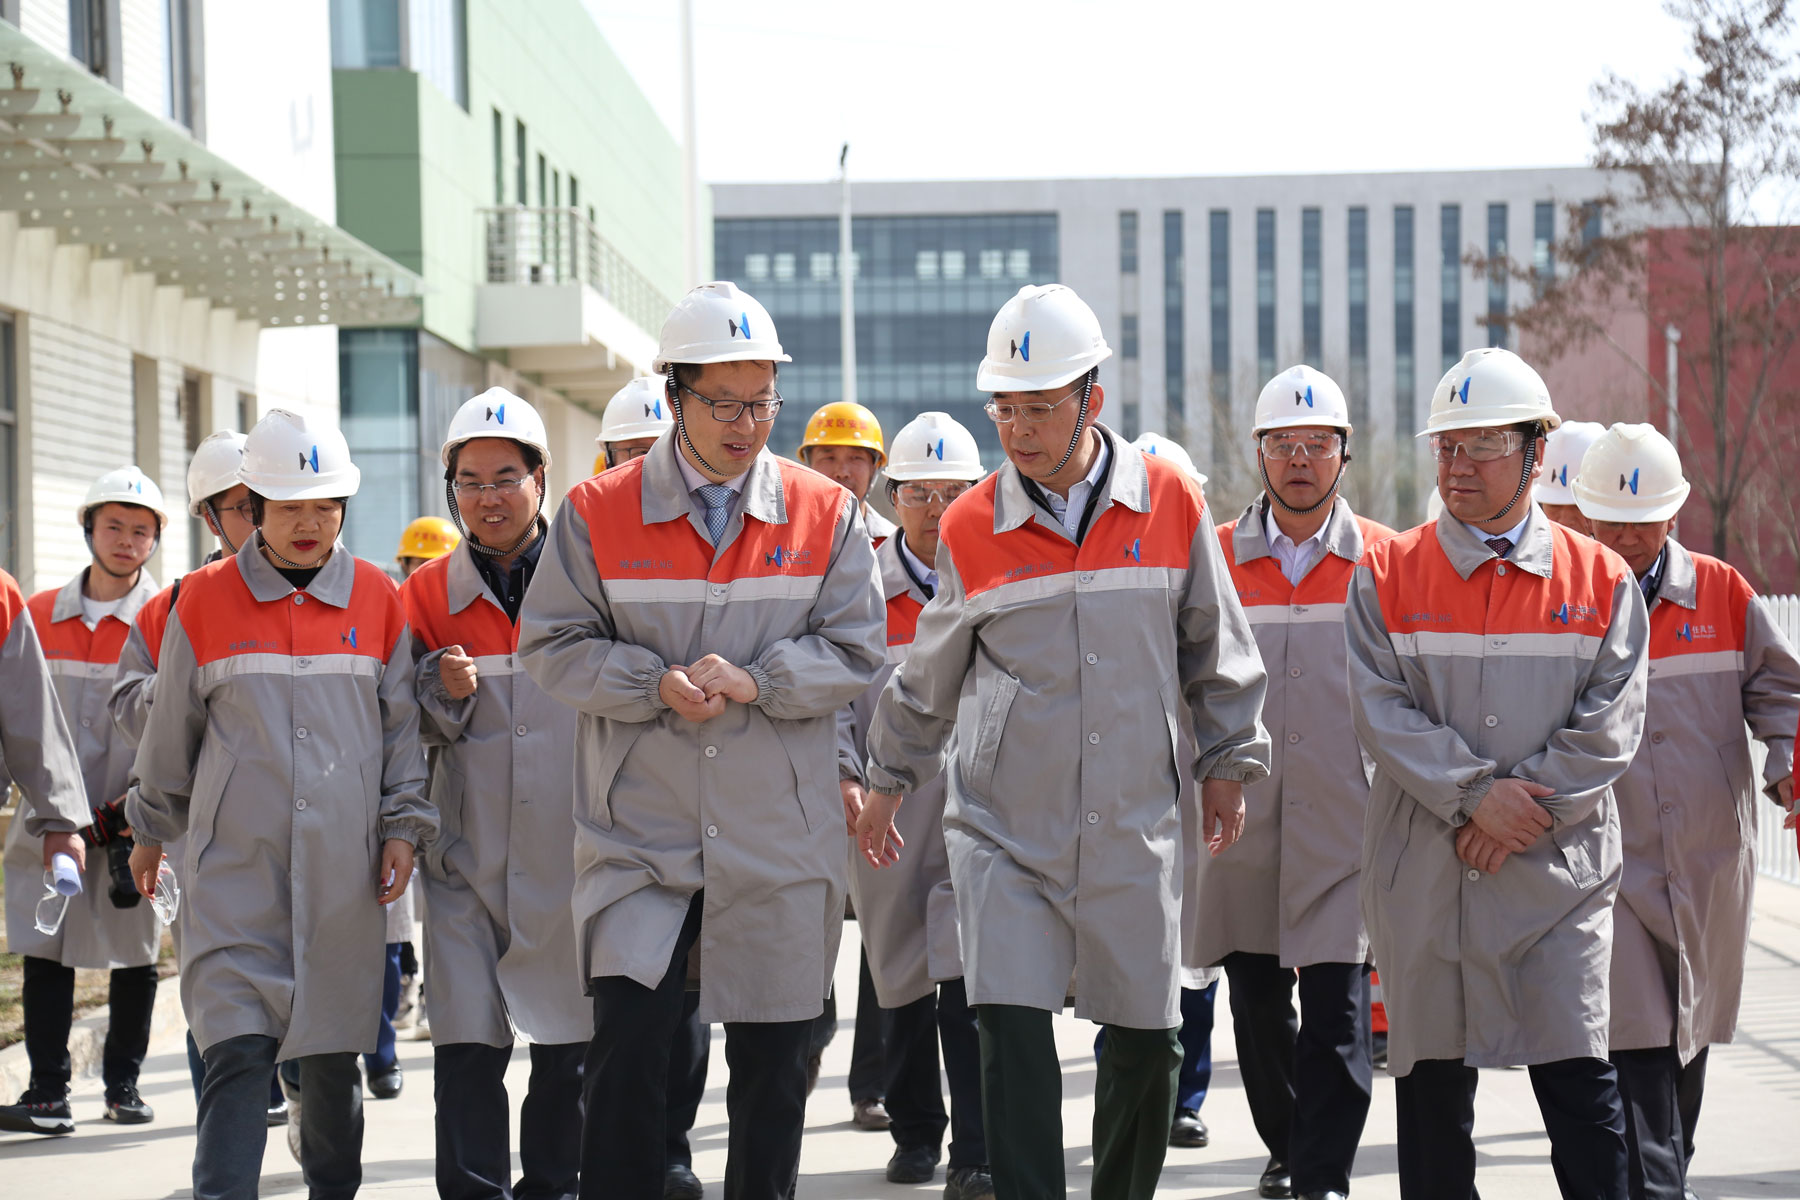 Jiang Zhigang, deputy secretary of the Party Committee of Ningxia Hui Autonomous Region and secretary of the Yinchuan Municipal Party Committee, visited the Hans LNG factory to inspect and guide the safety work.